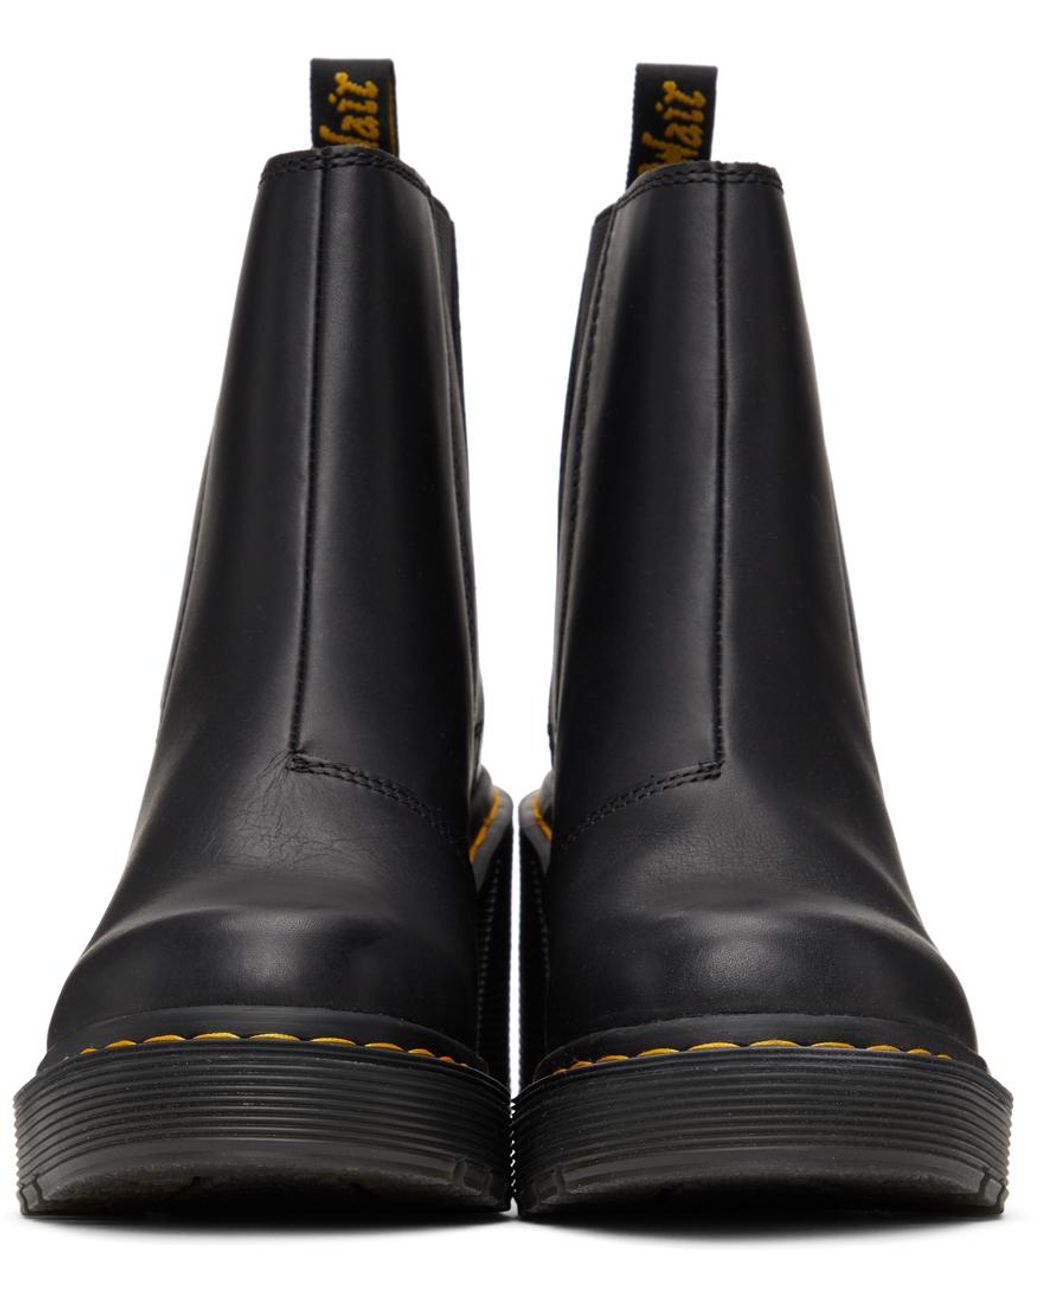 Dr. Martens Spence Fla Heel Chelsea Boots in Black | Lyst Canada